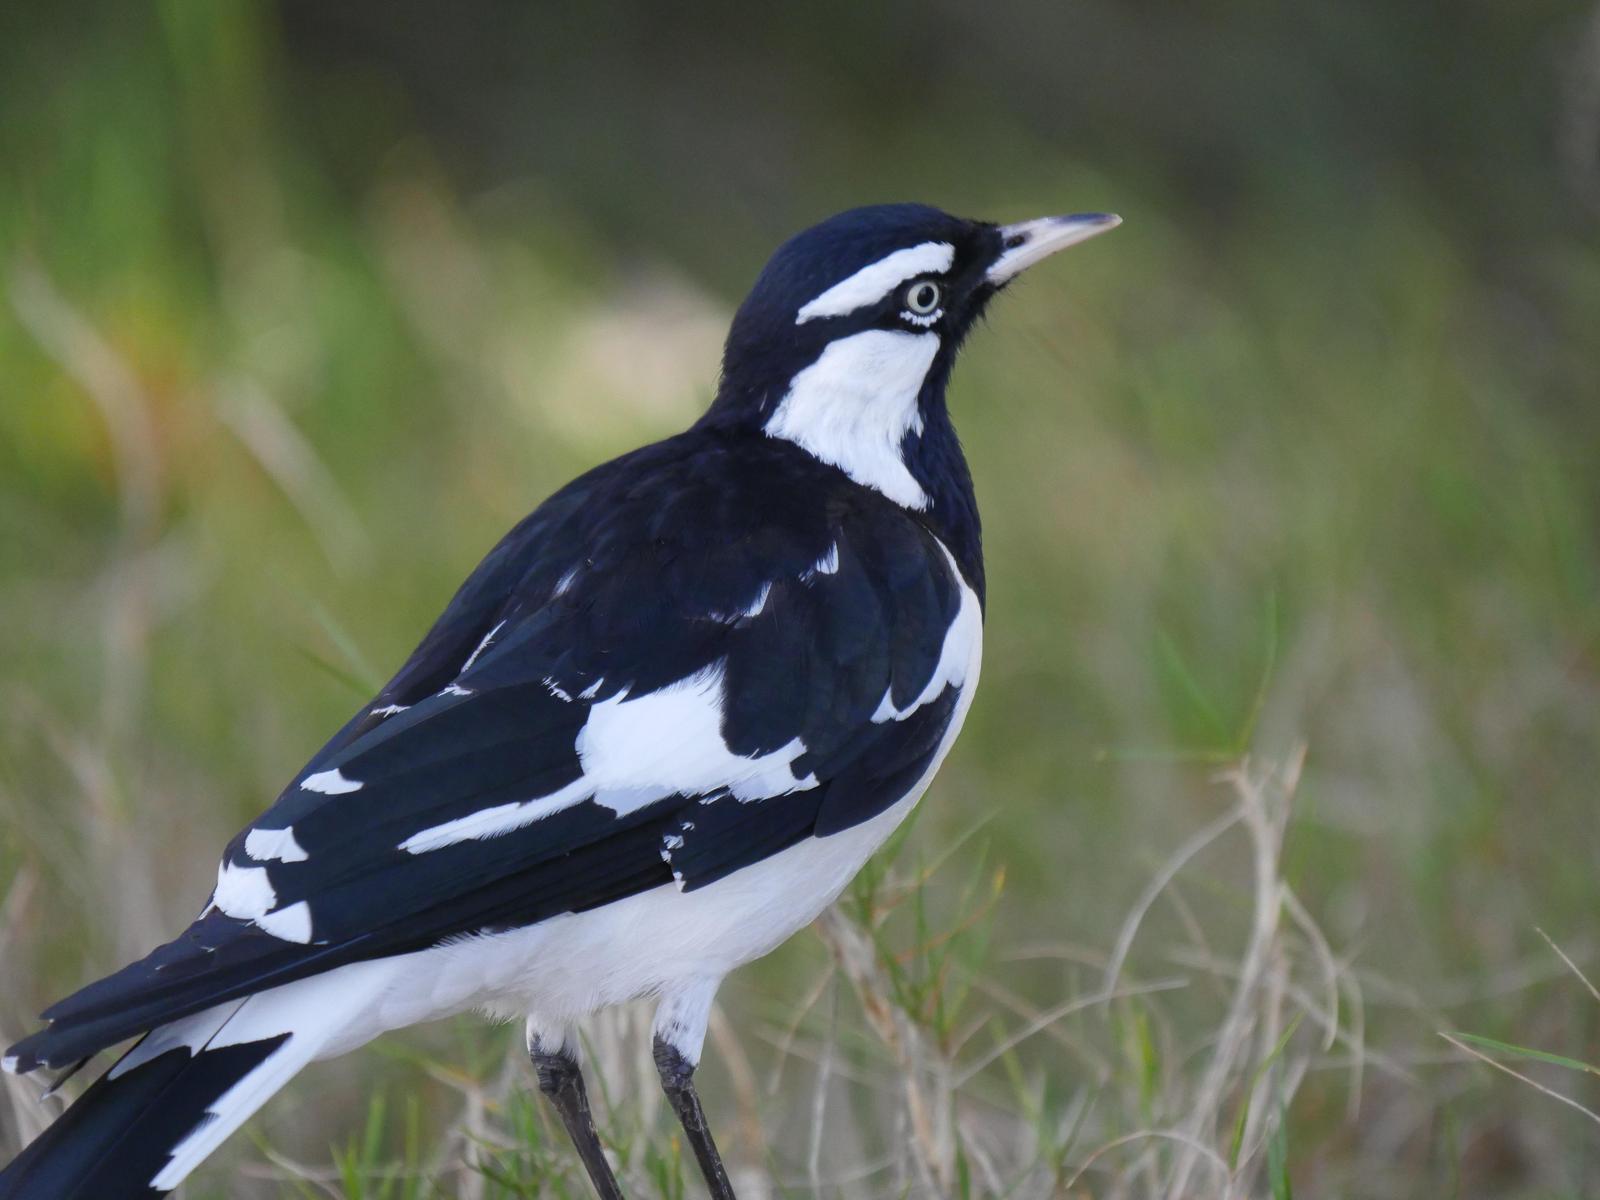 Magpie-lark Photo by Peter Lowe